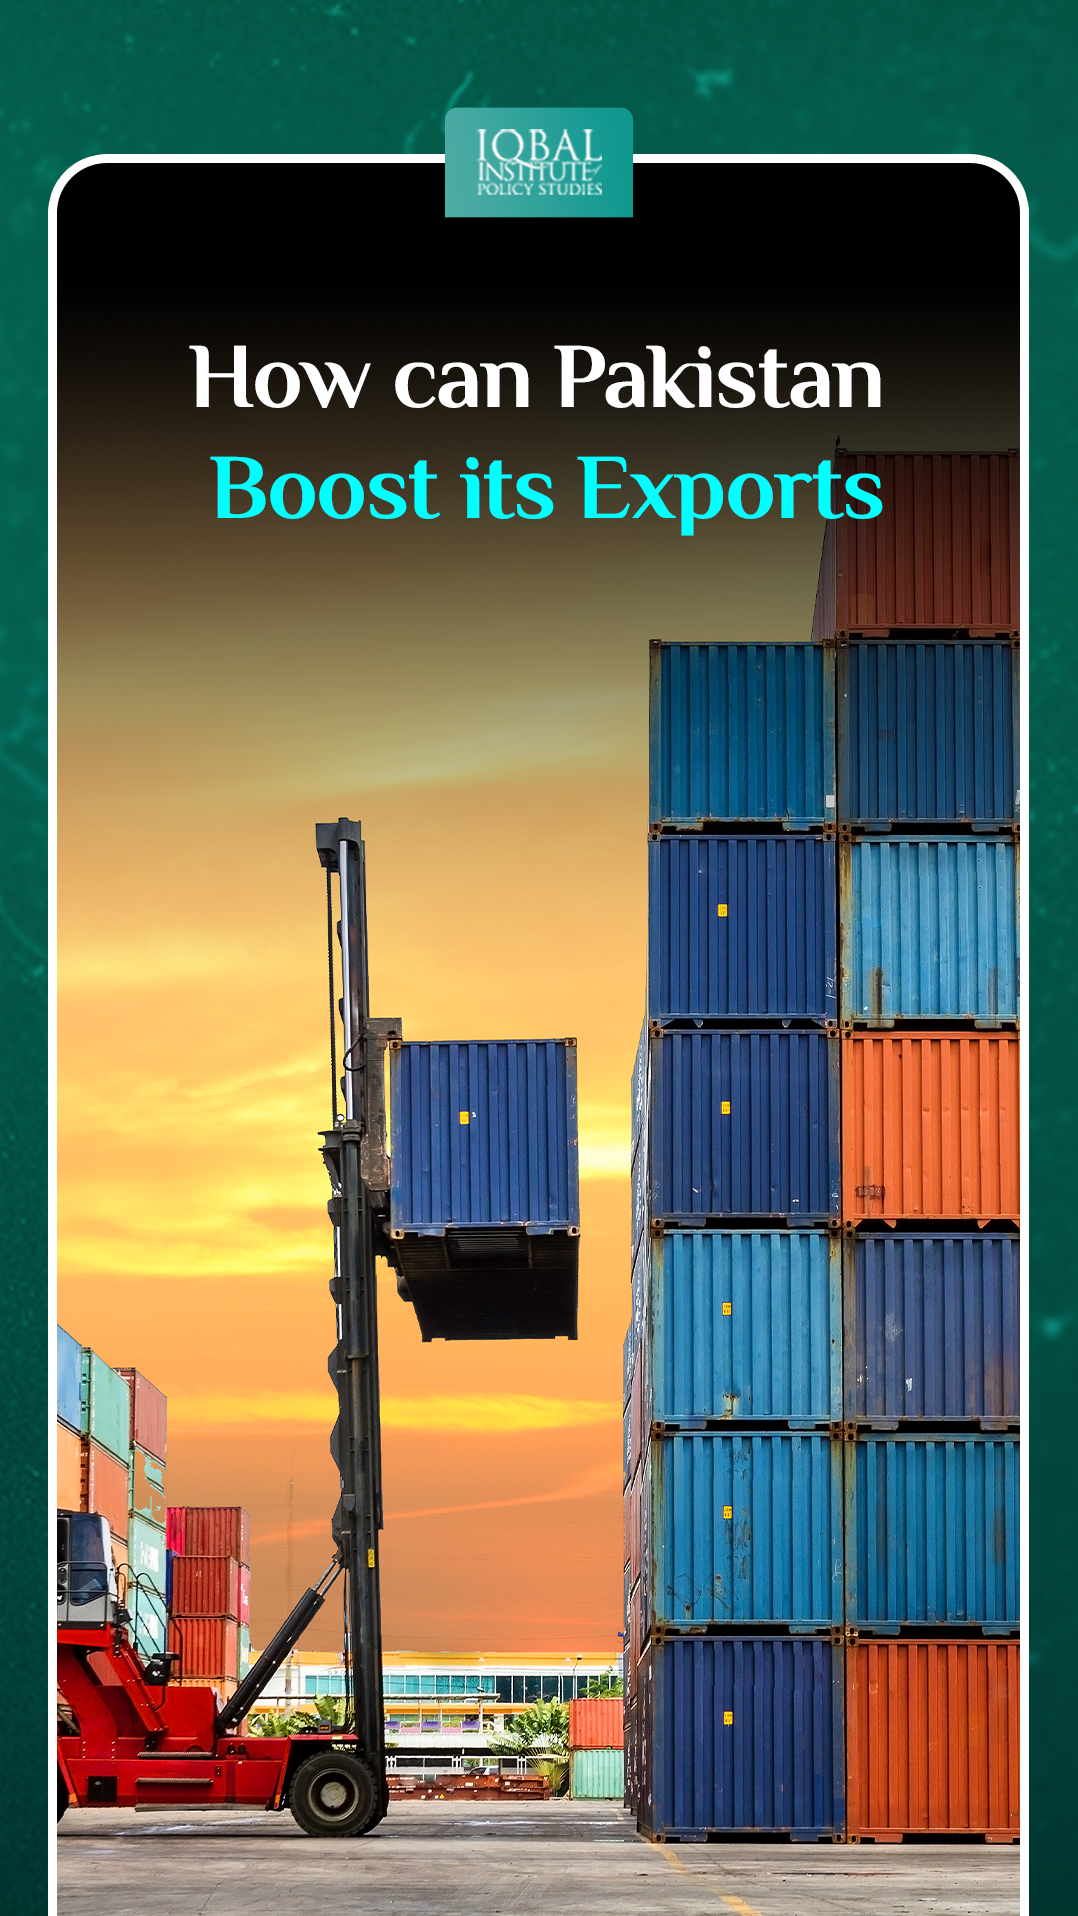 How can Pakistan Boost/ Recover/ Grow its Exports?